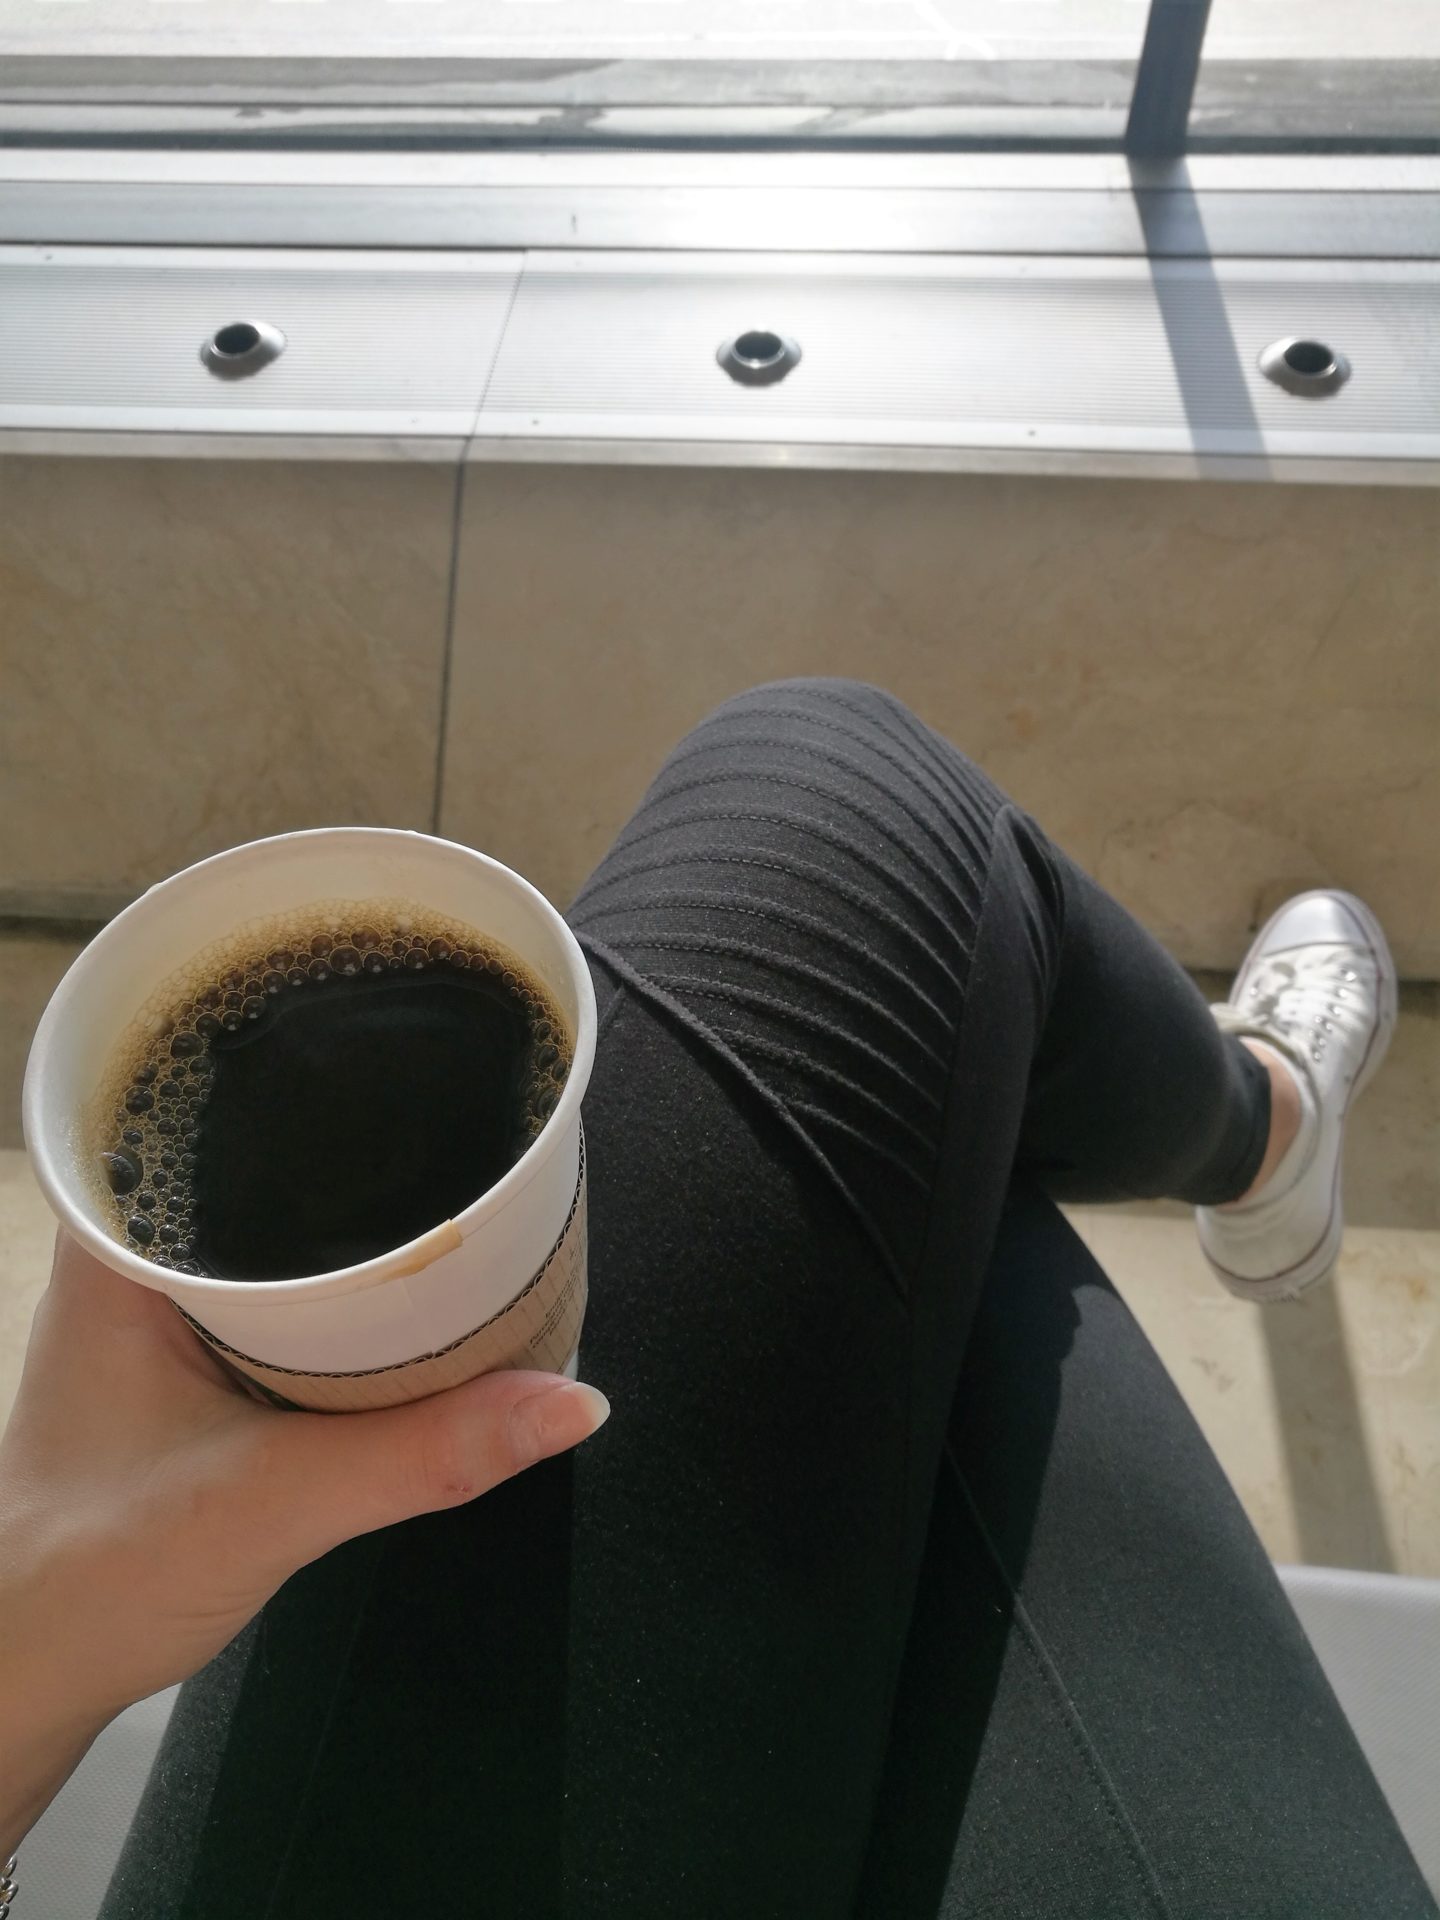 Hasta pronto Madrid Annimarian A girl sitting at the airport drinking black coffee